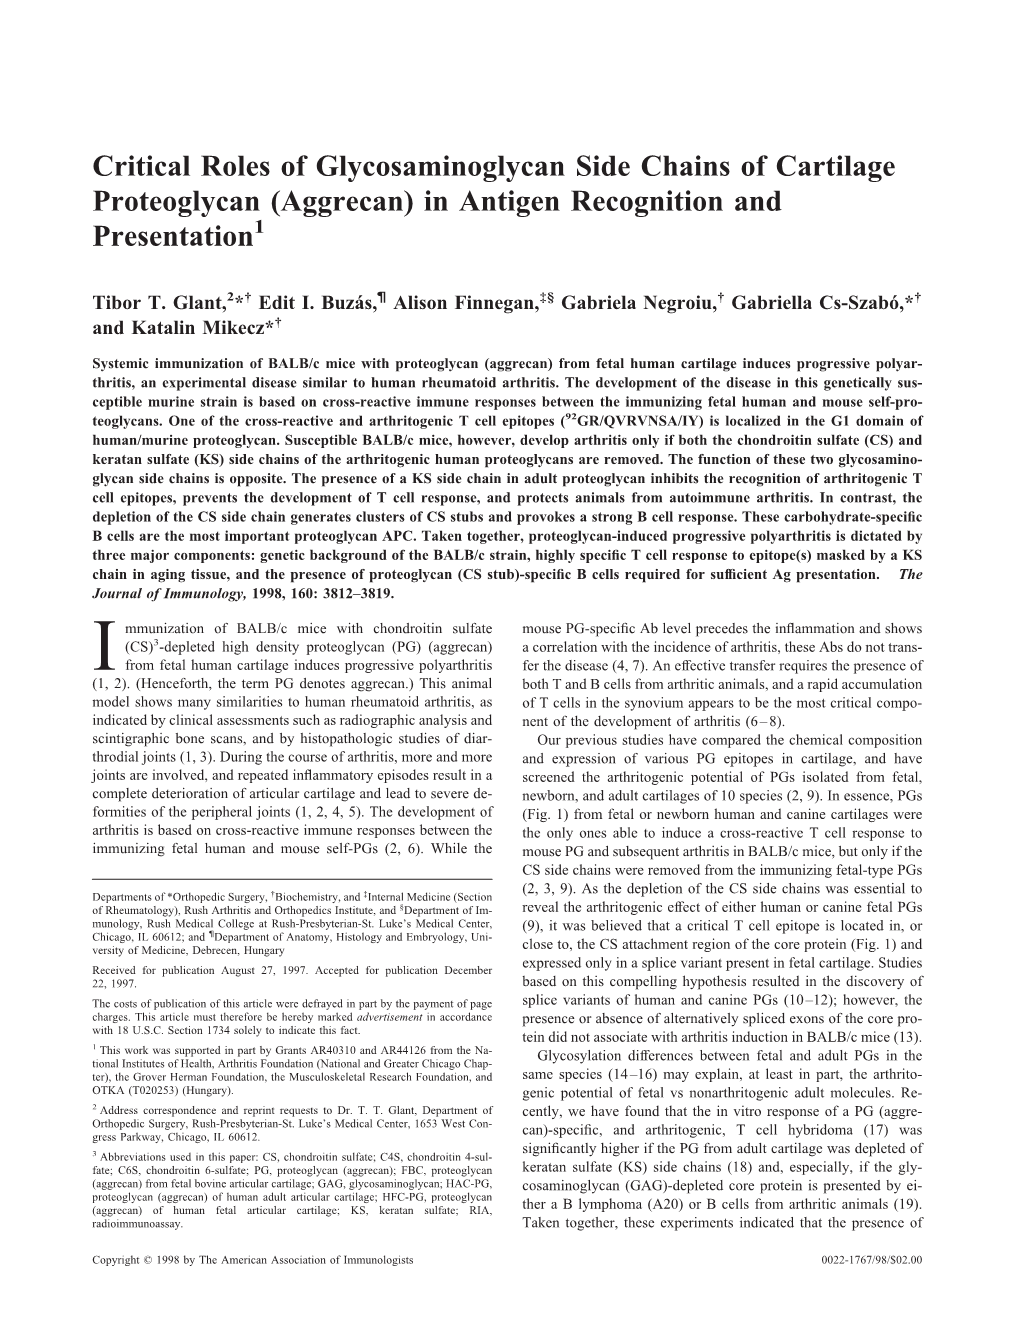 Recognition and Presentation of Cartilage Proteoglycan (Aggrecan